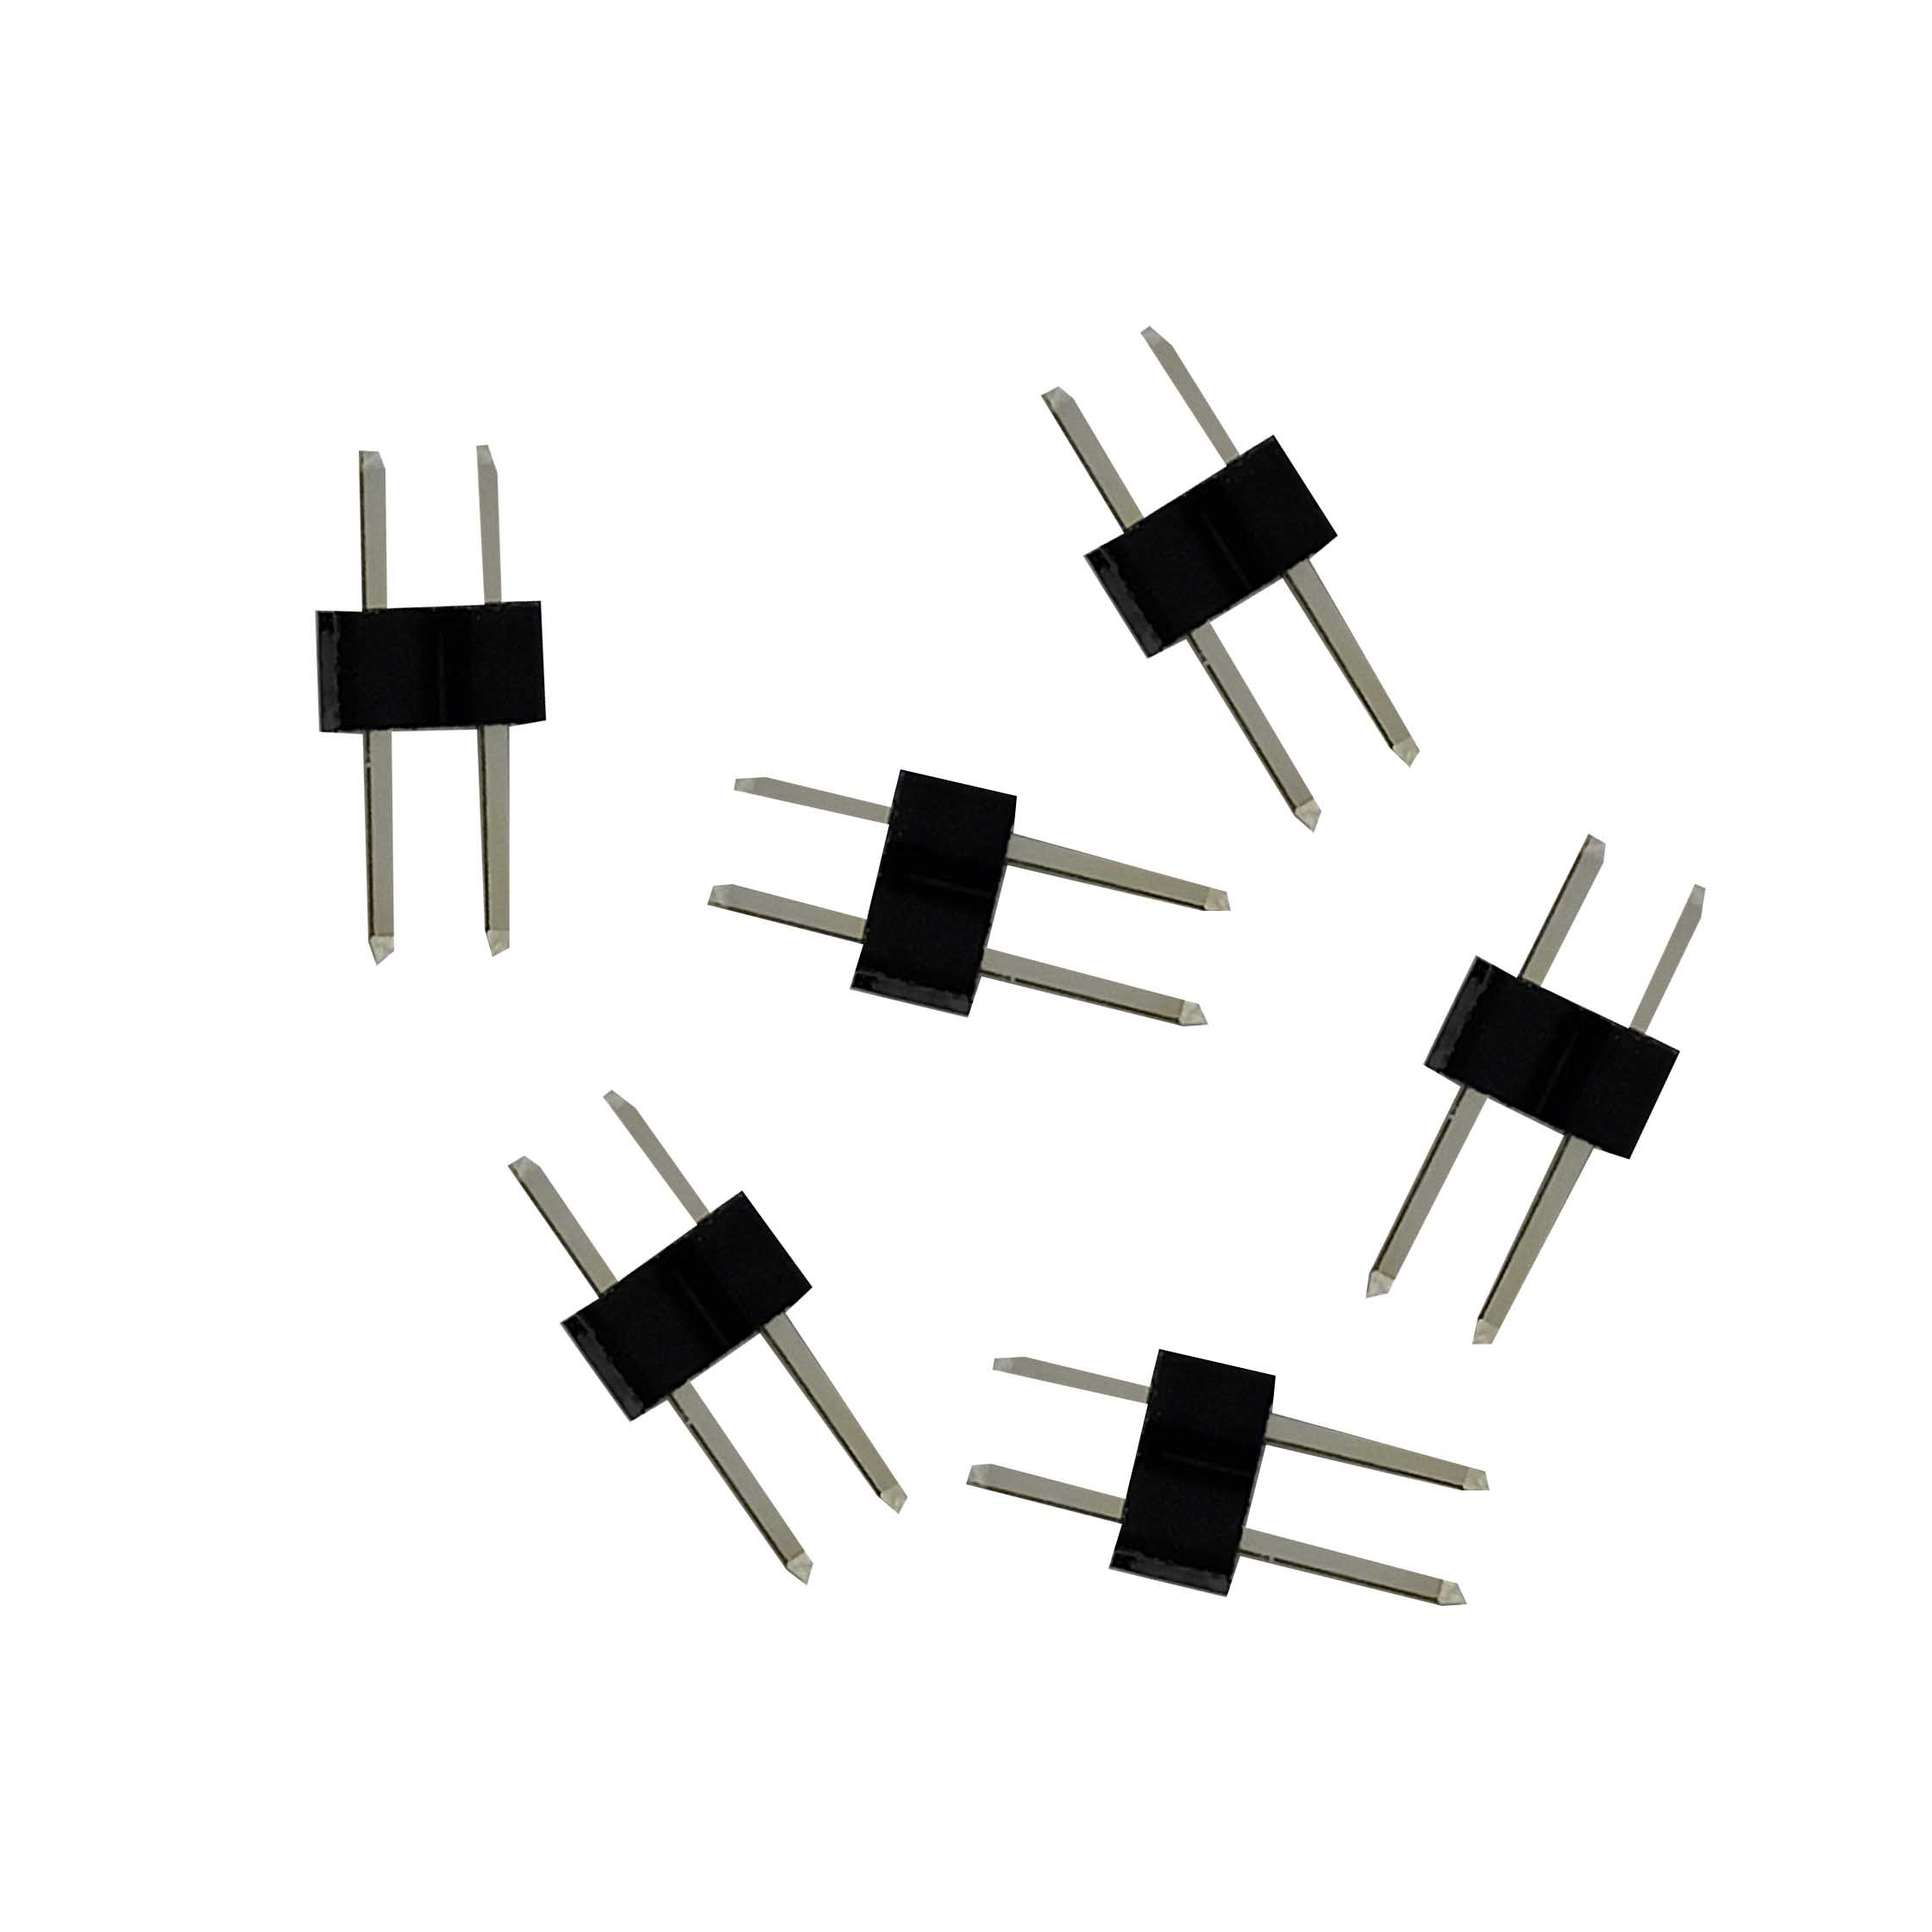 2.00mm pitch Pin Header Through Hole 2 position equivalent to Molex 877520202